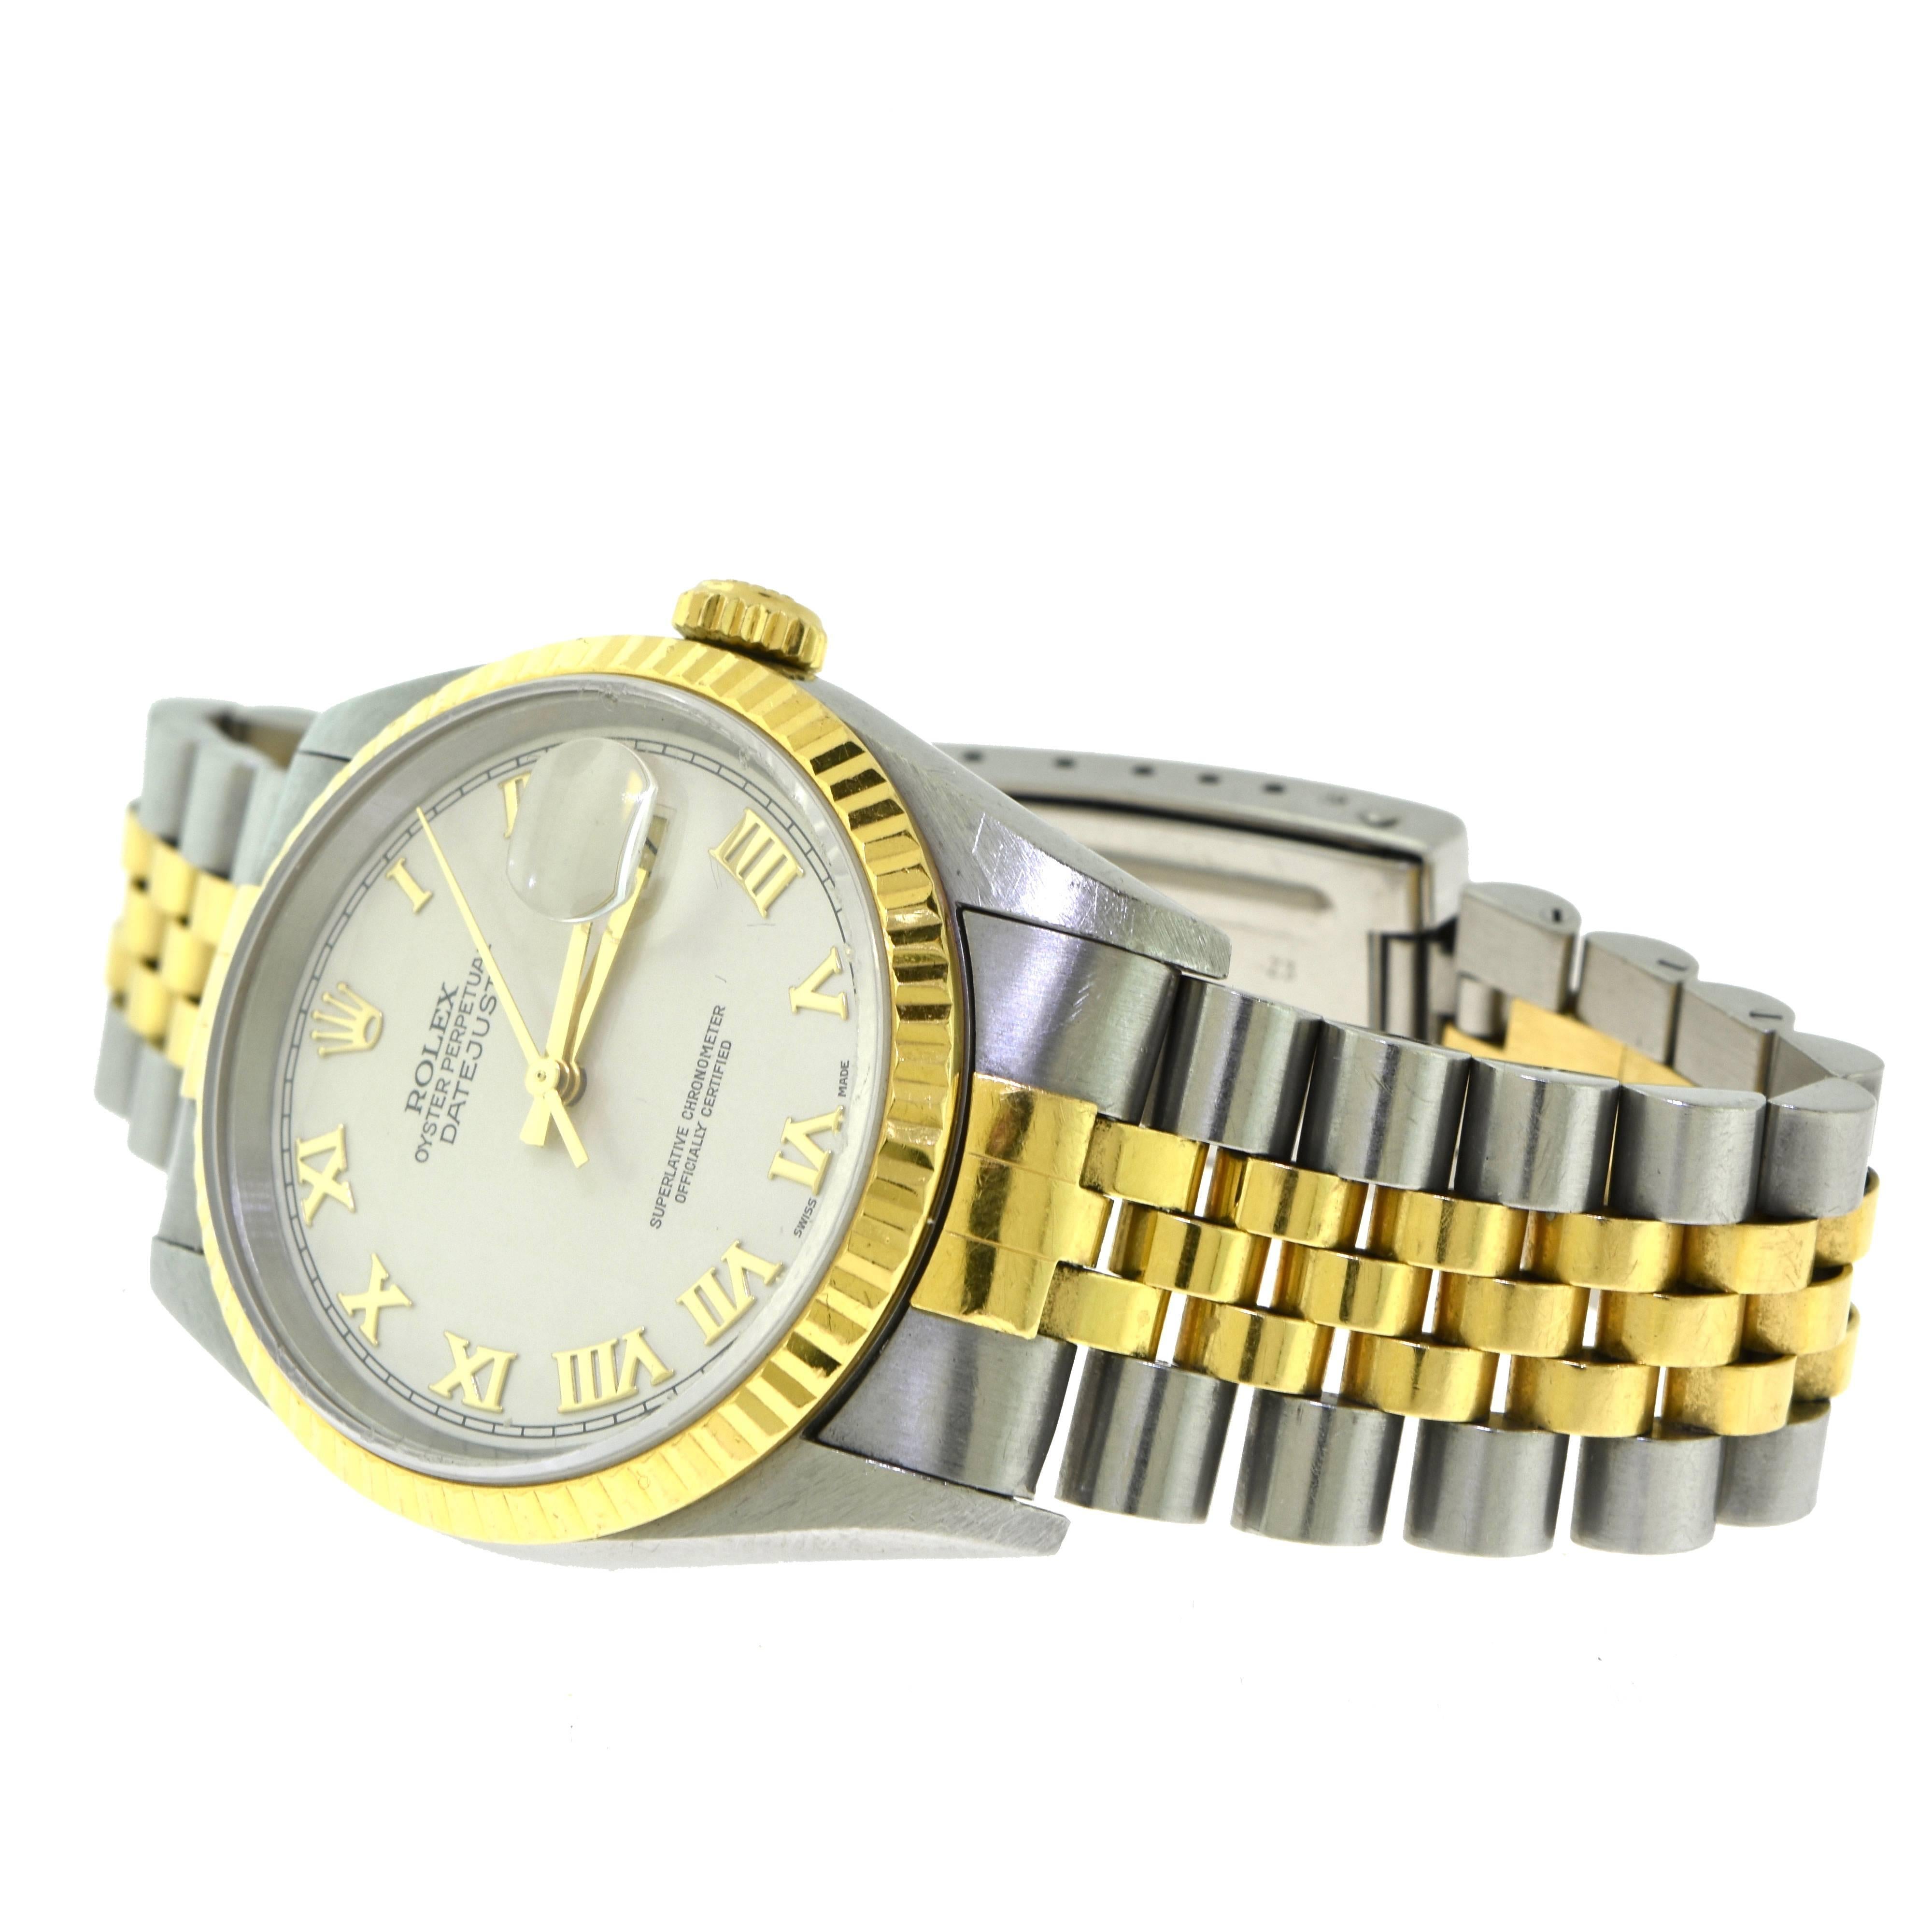 Rolex Datejust Two Tone Gold or Steel Ivory Pyramid Roman Dial Model 16233 Watch In Good Condition For Sale In Miami, FL